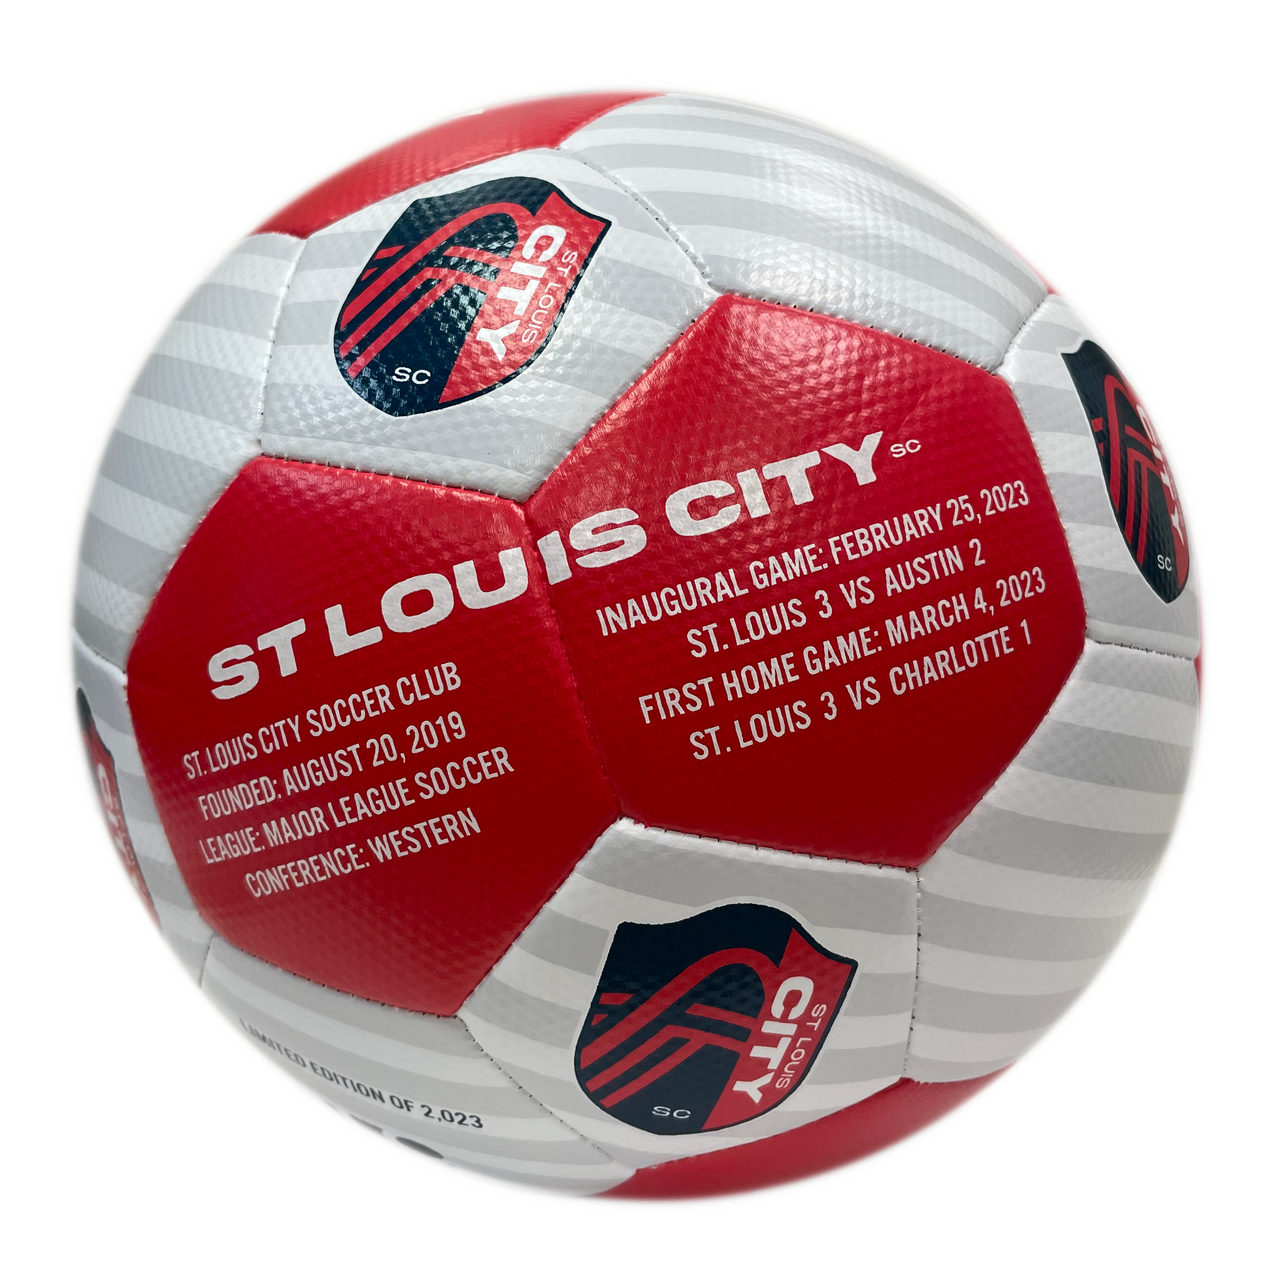 Five things to know for the inaugural St. Louis CITY SC season